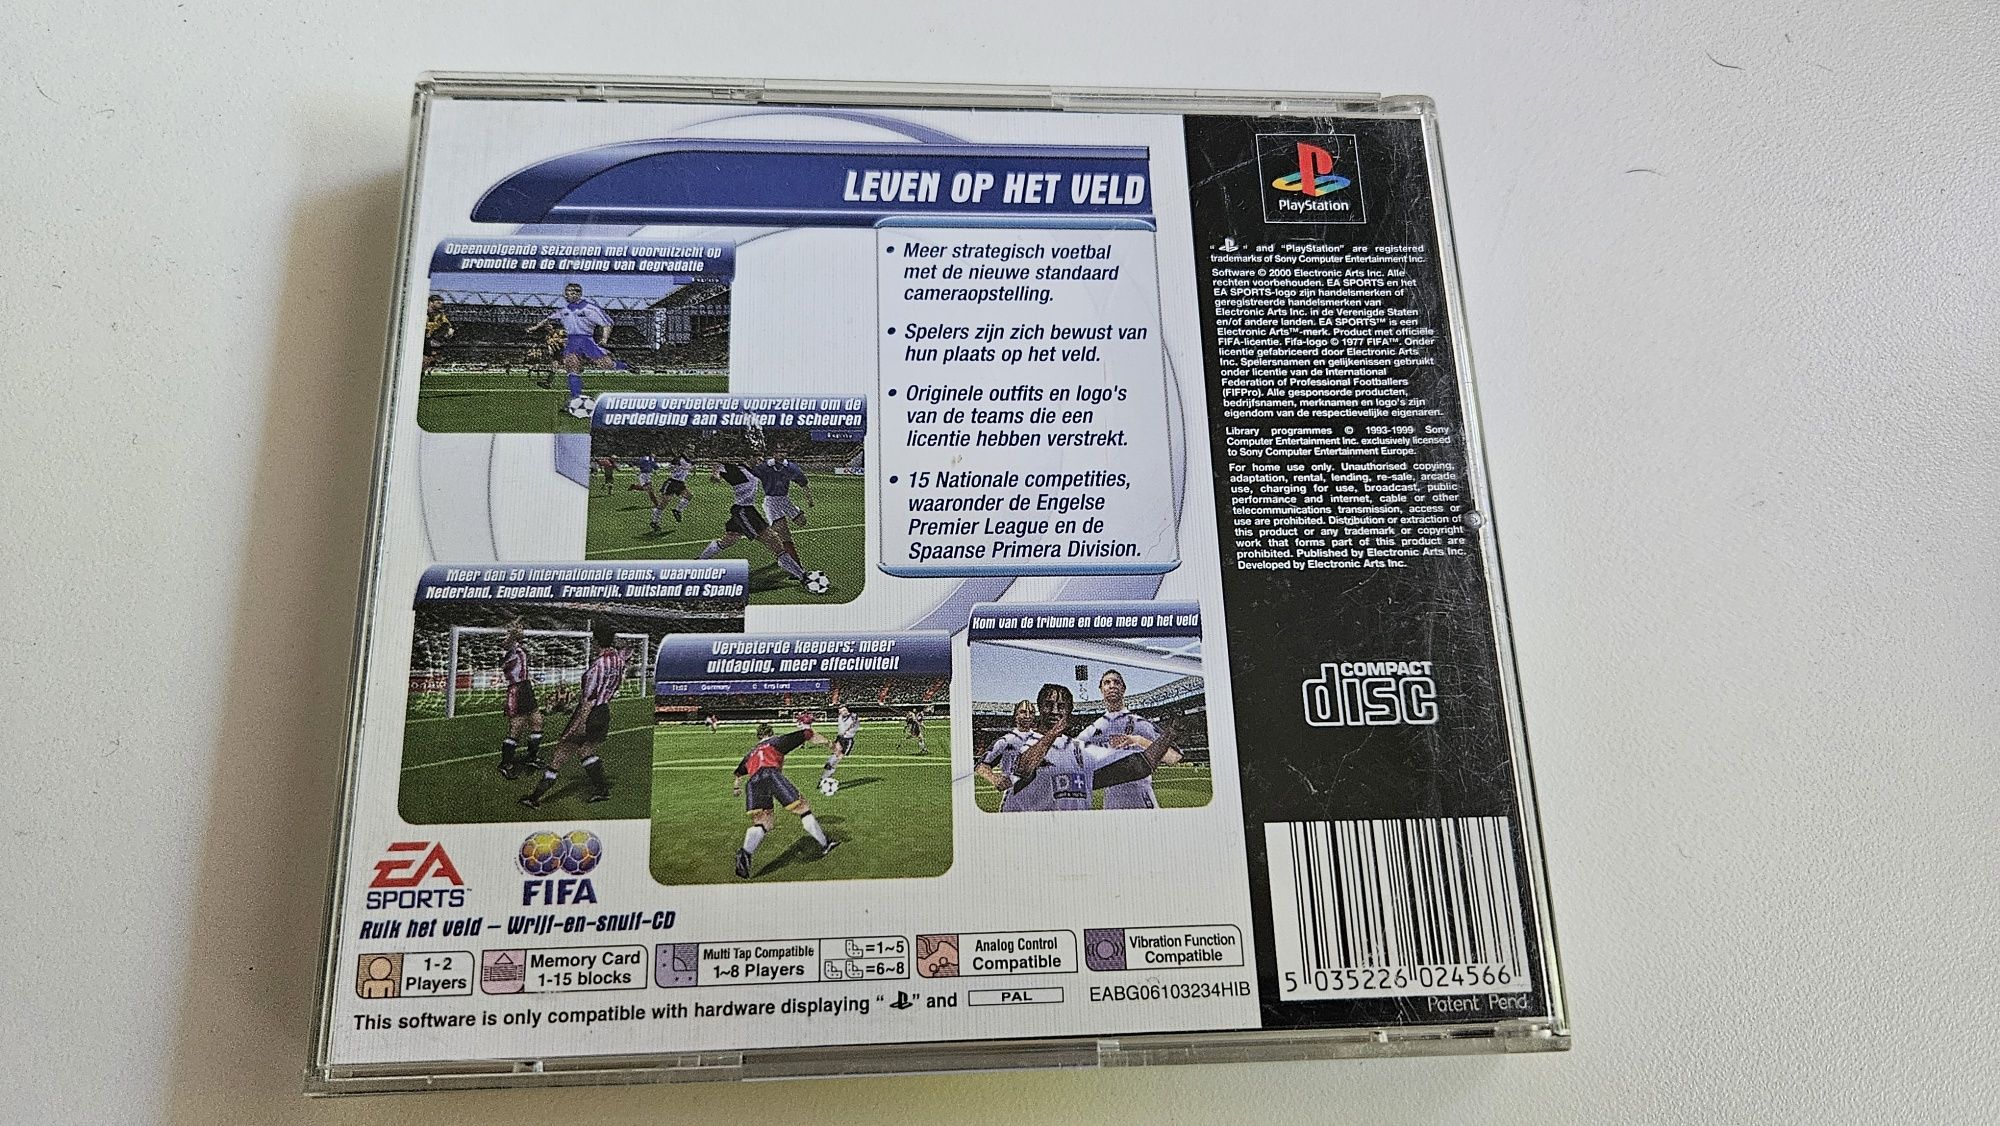 Fifa 2001 PSX / PS One / PlayStation 1